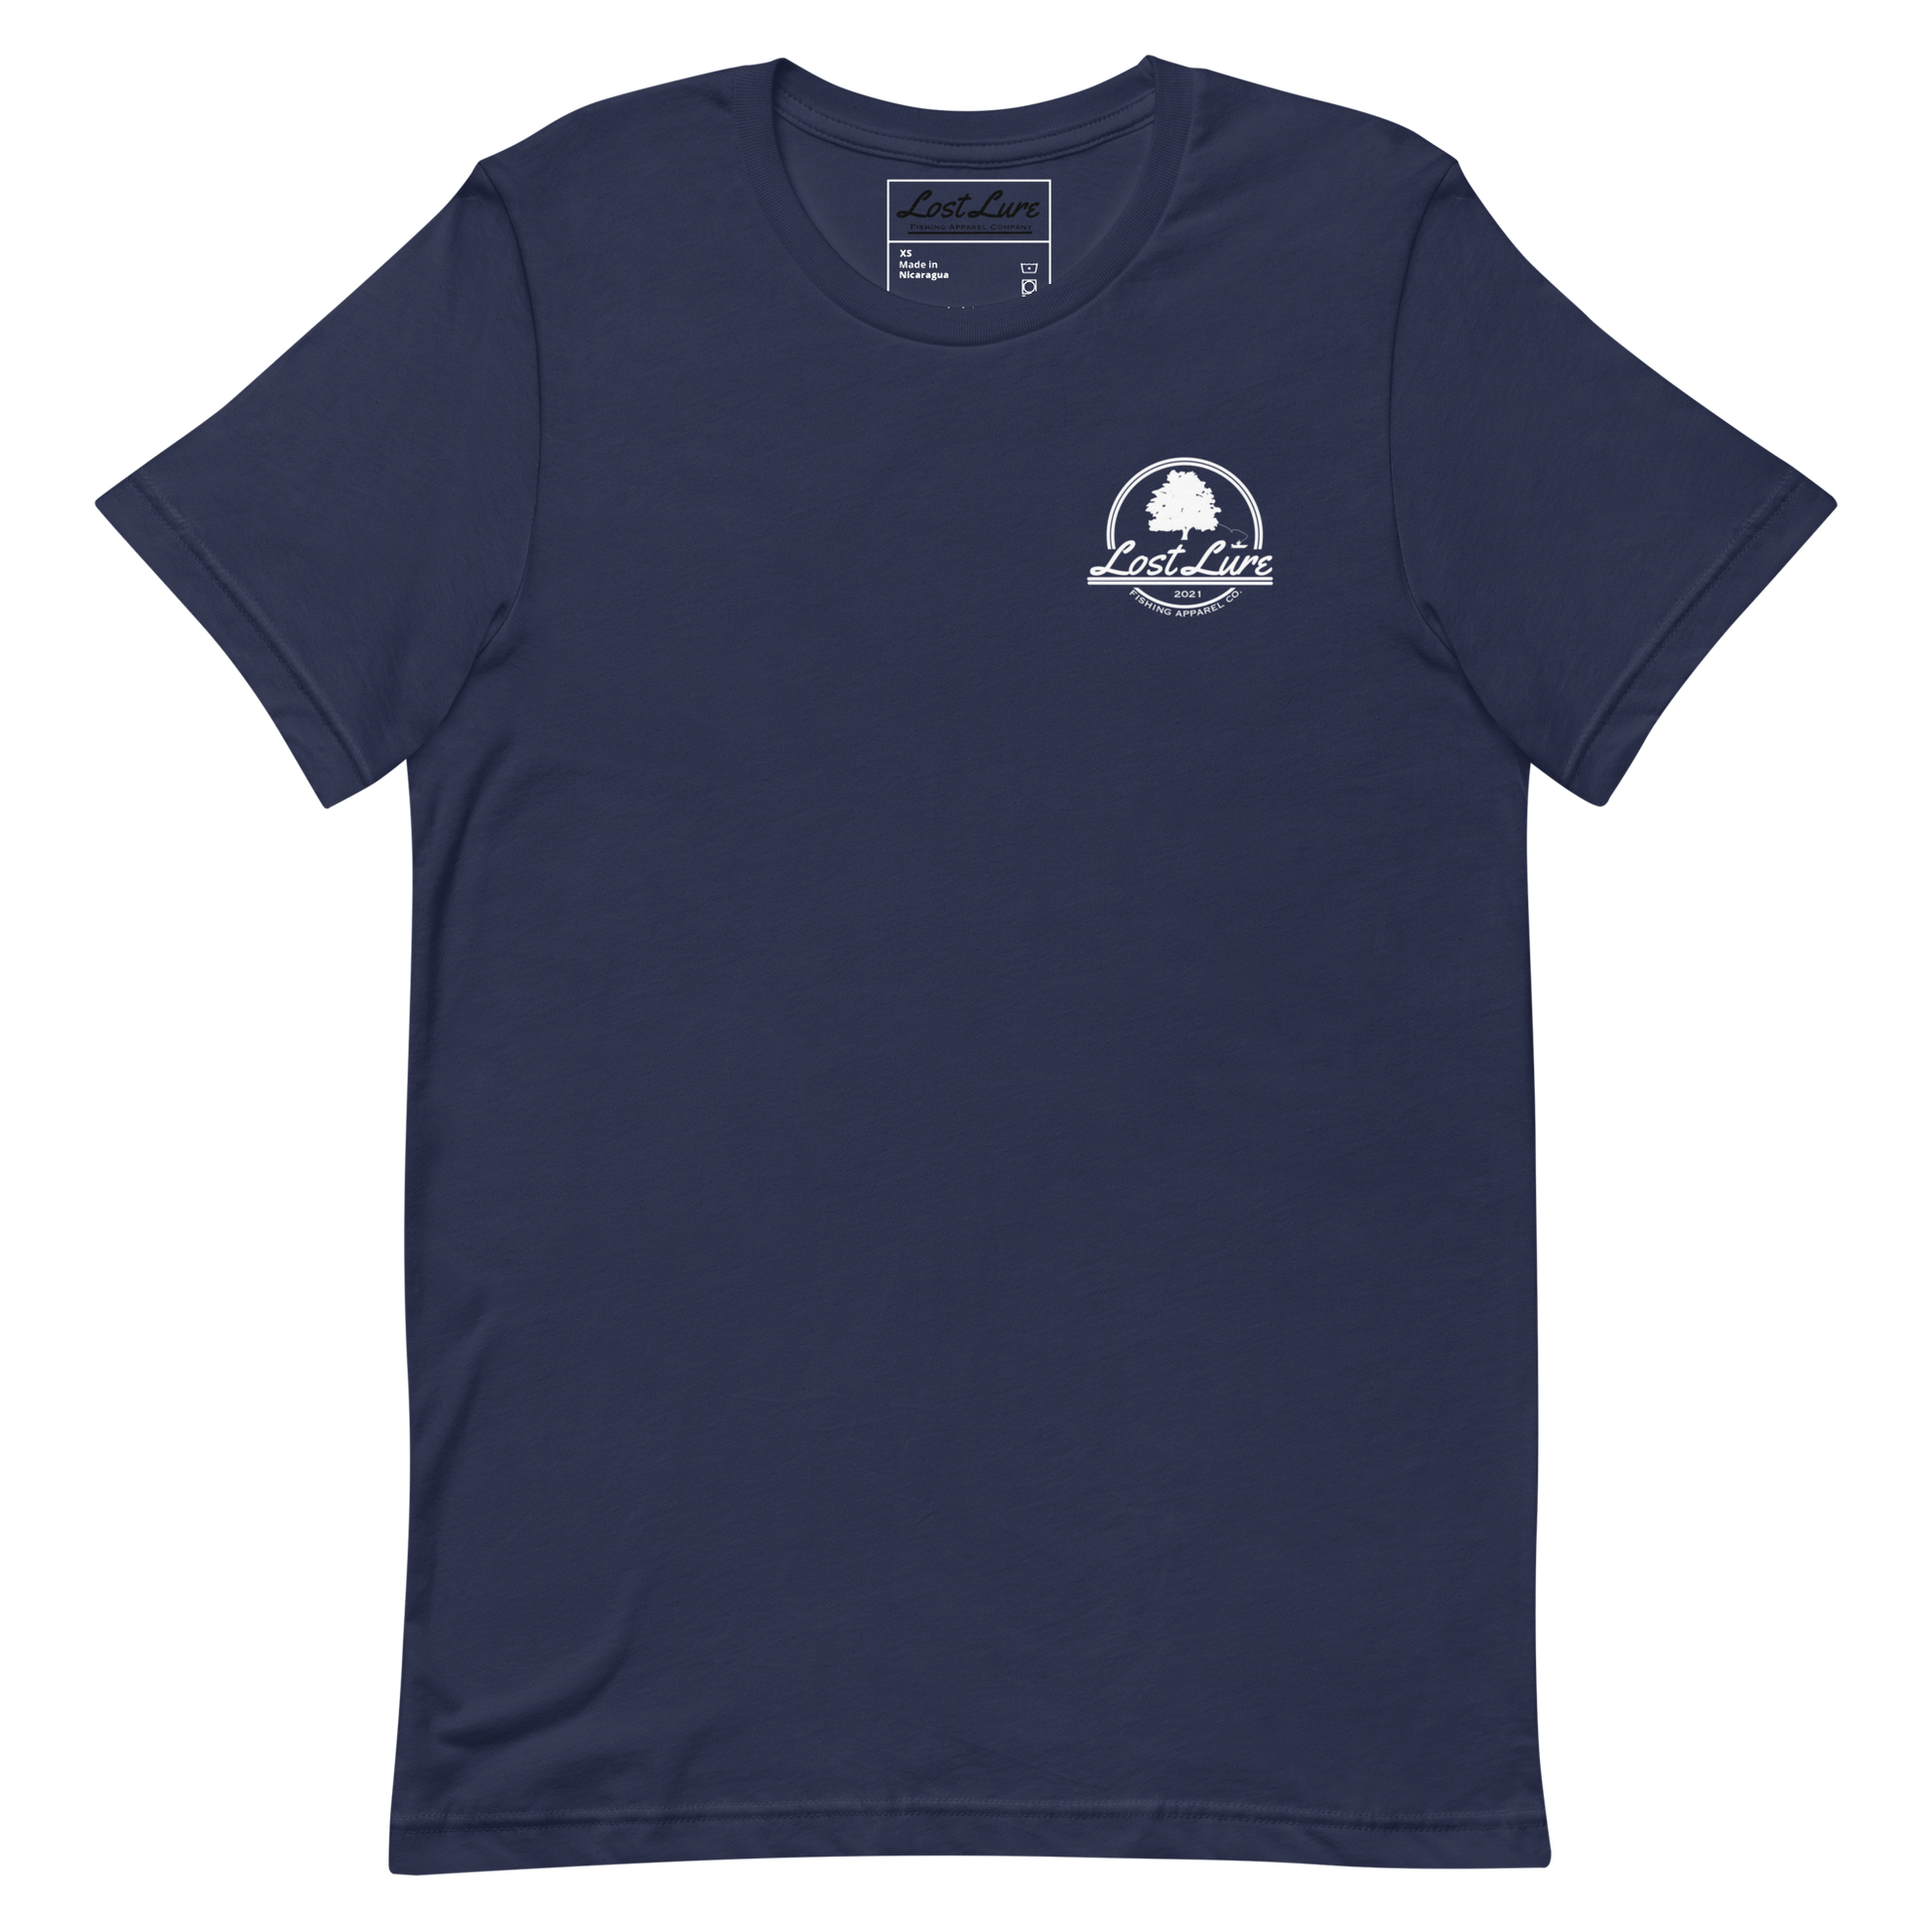 Cutthroat Trout fishing shirt. It’s an American traditional style design with a cutthroat trout and a dagger. The shirt reads Cutthroat trout, est. 2021, lost lure fishing apparel company. The front of the shirt has the lost lure logo. Dark blue fishing shirt, front side